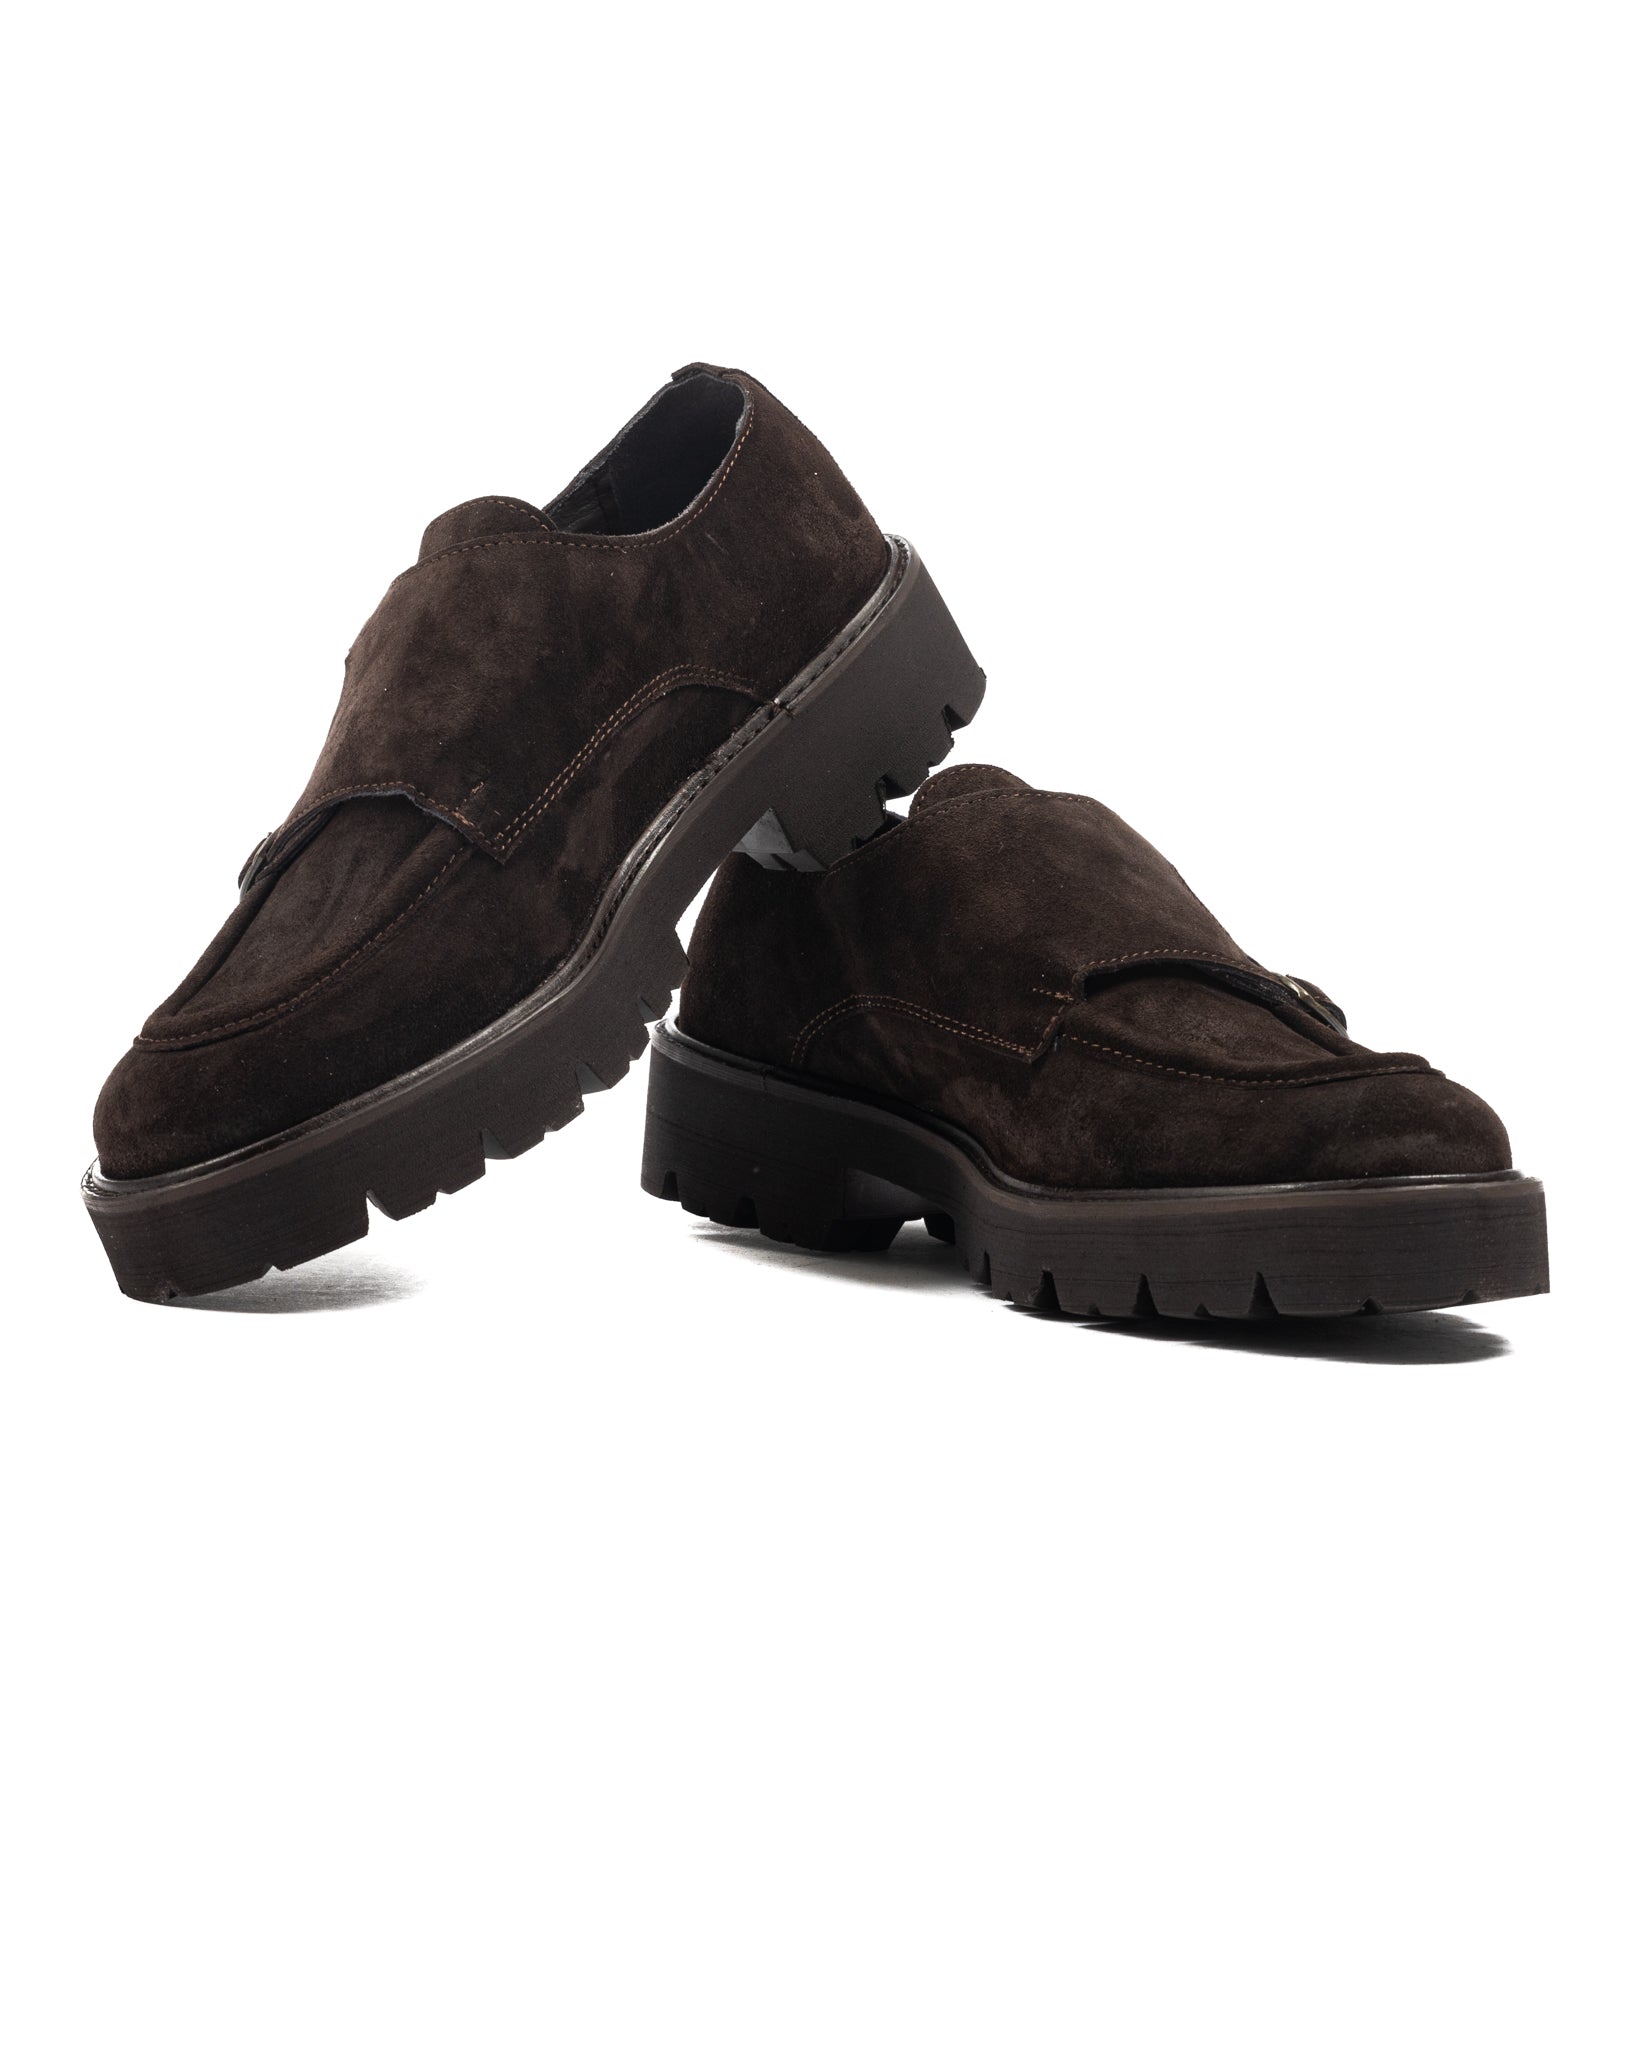 Falcon- dark brown suede moccasin with double buckle 